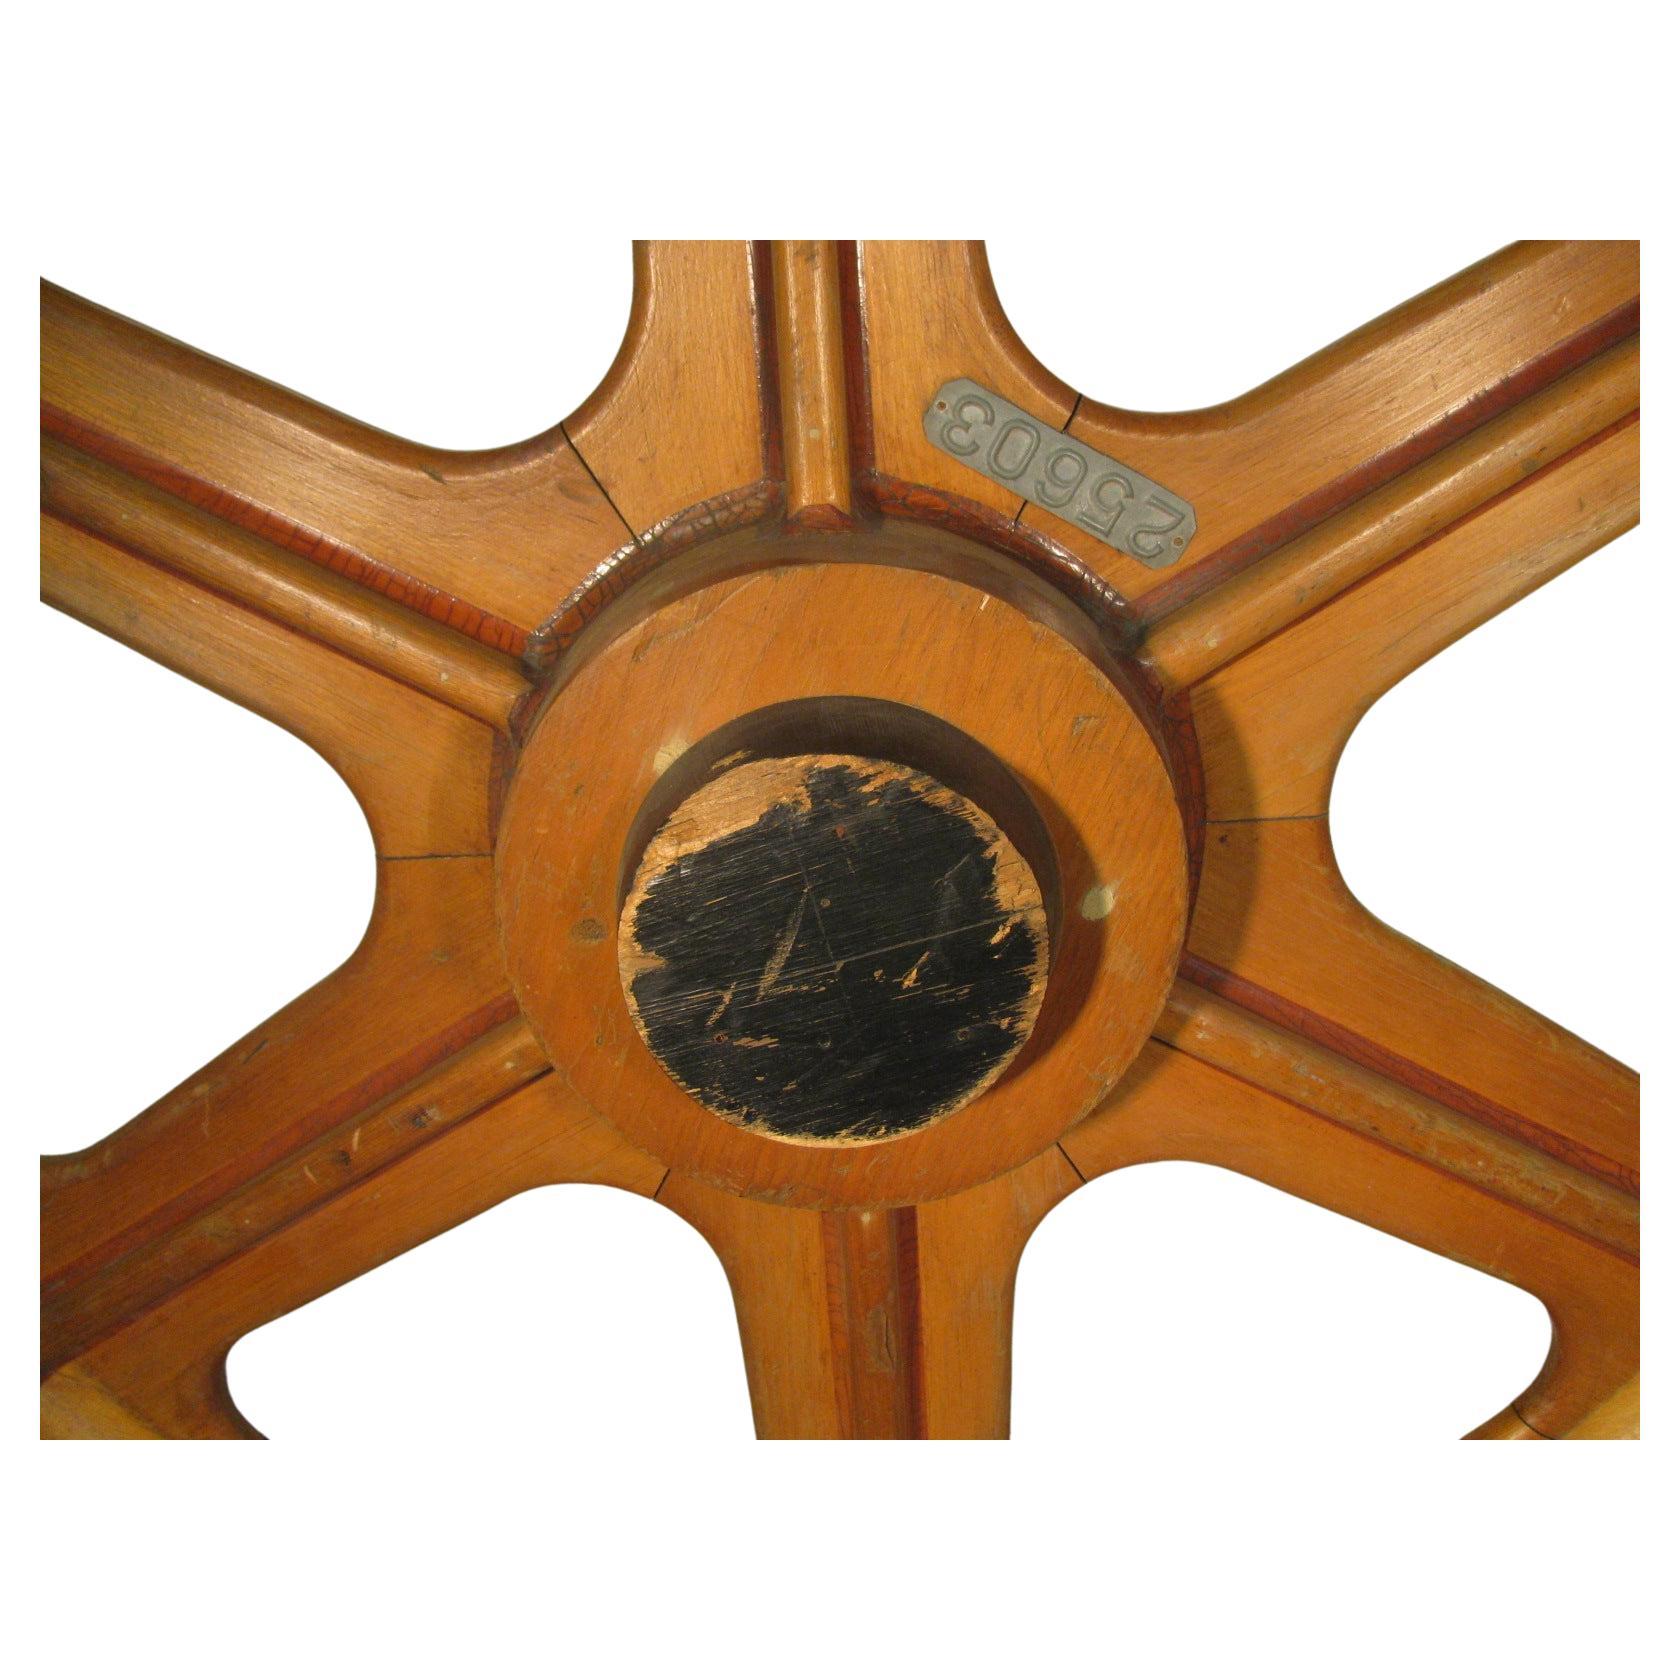 19thC Massive Industrial  Antique Architectural Handmade Foundry Gear Wheel In Good Condition For Sale In Port Jervis, NY